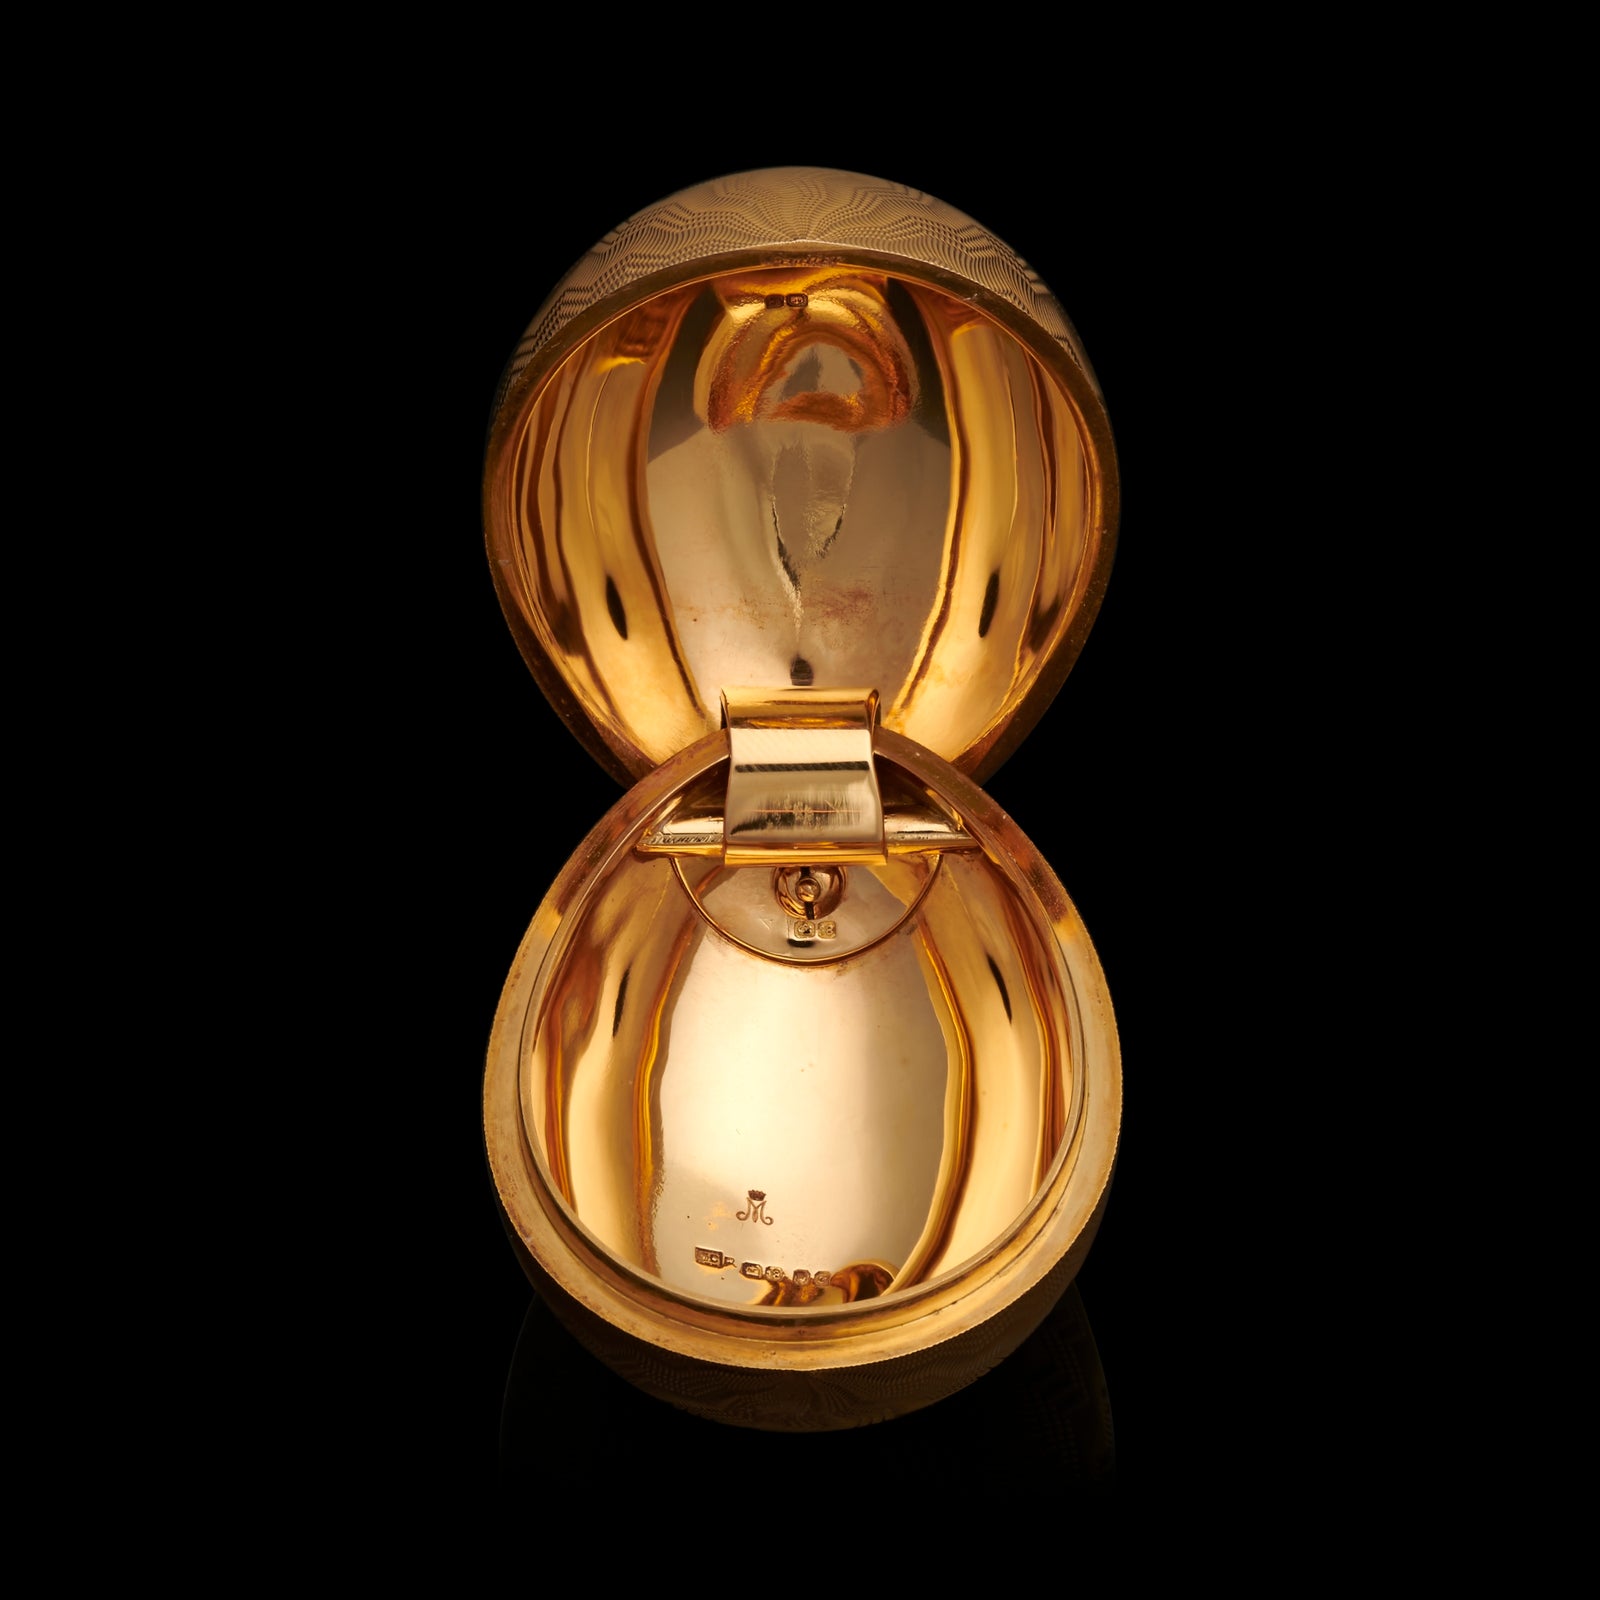 H.R.H. The Princess Margaret's 18 Carat Yellow Gold Egg created by Cartier Paris.